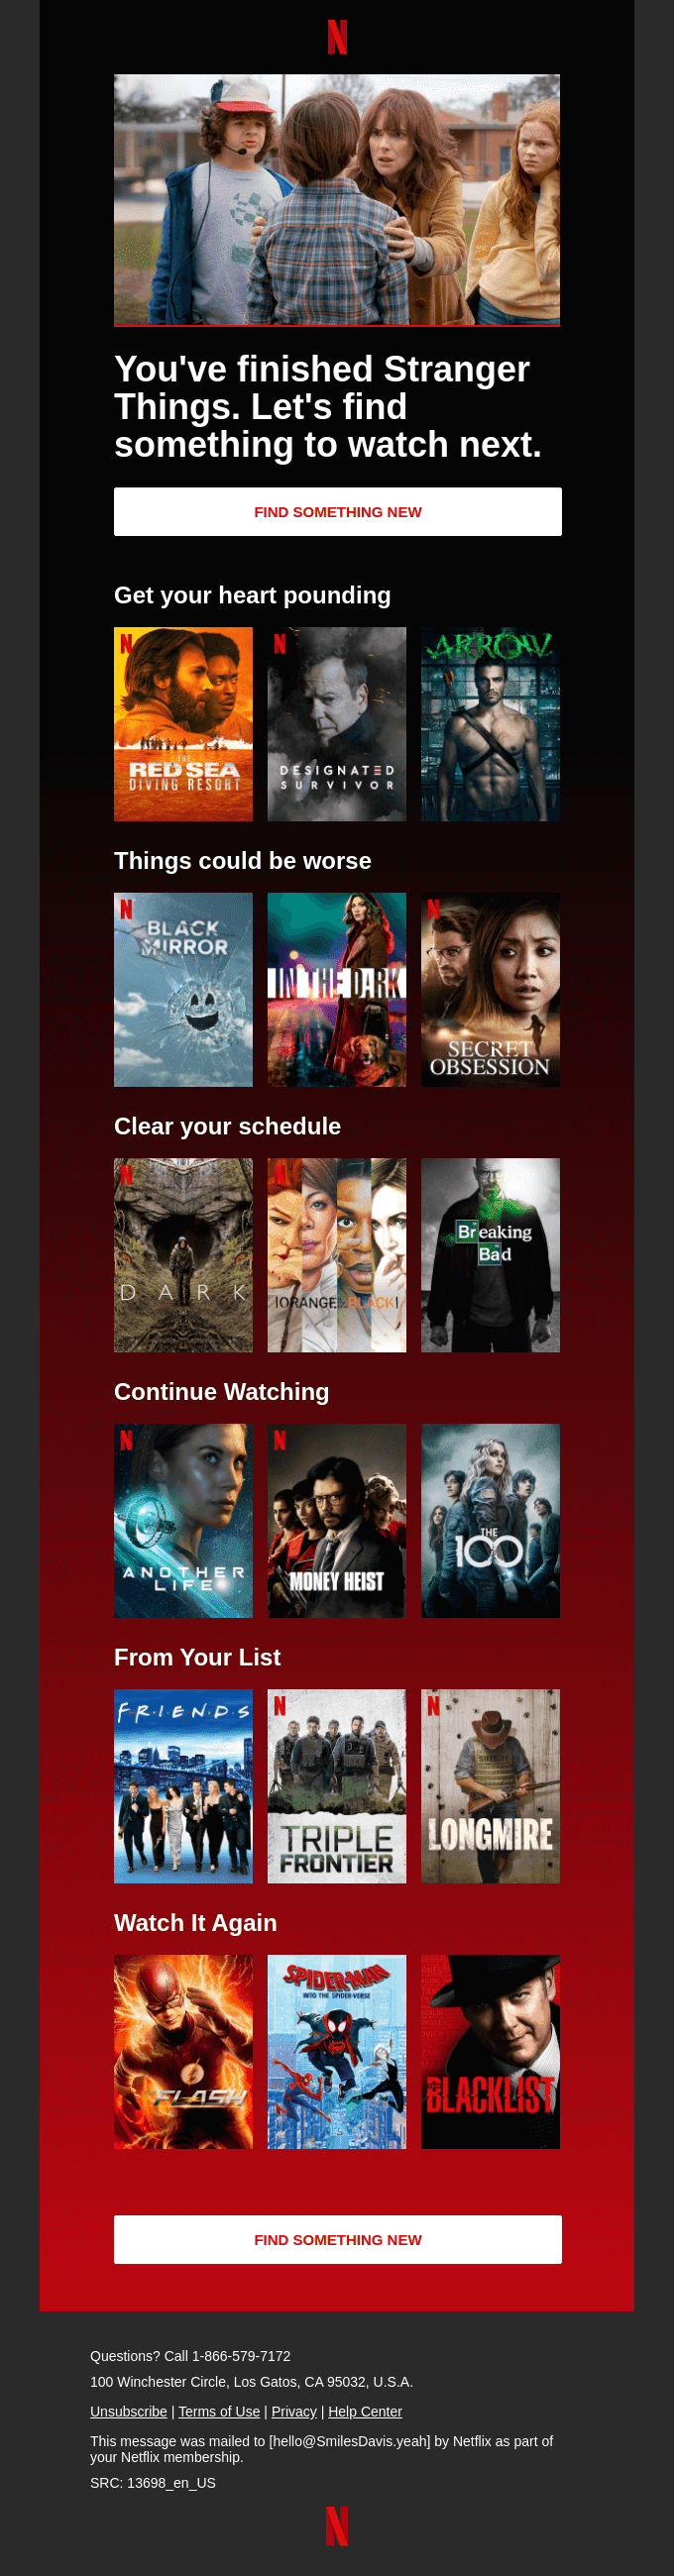 Netflix uses content personalization in this email